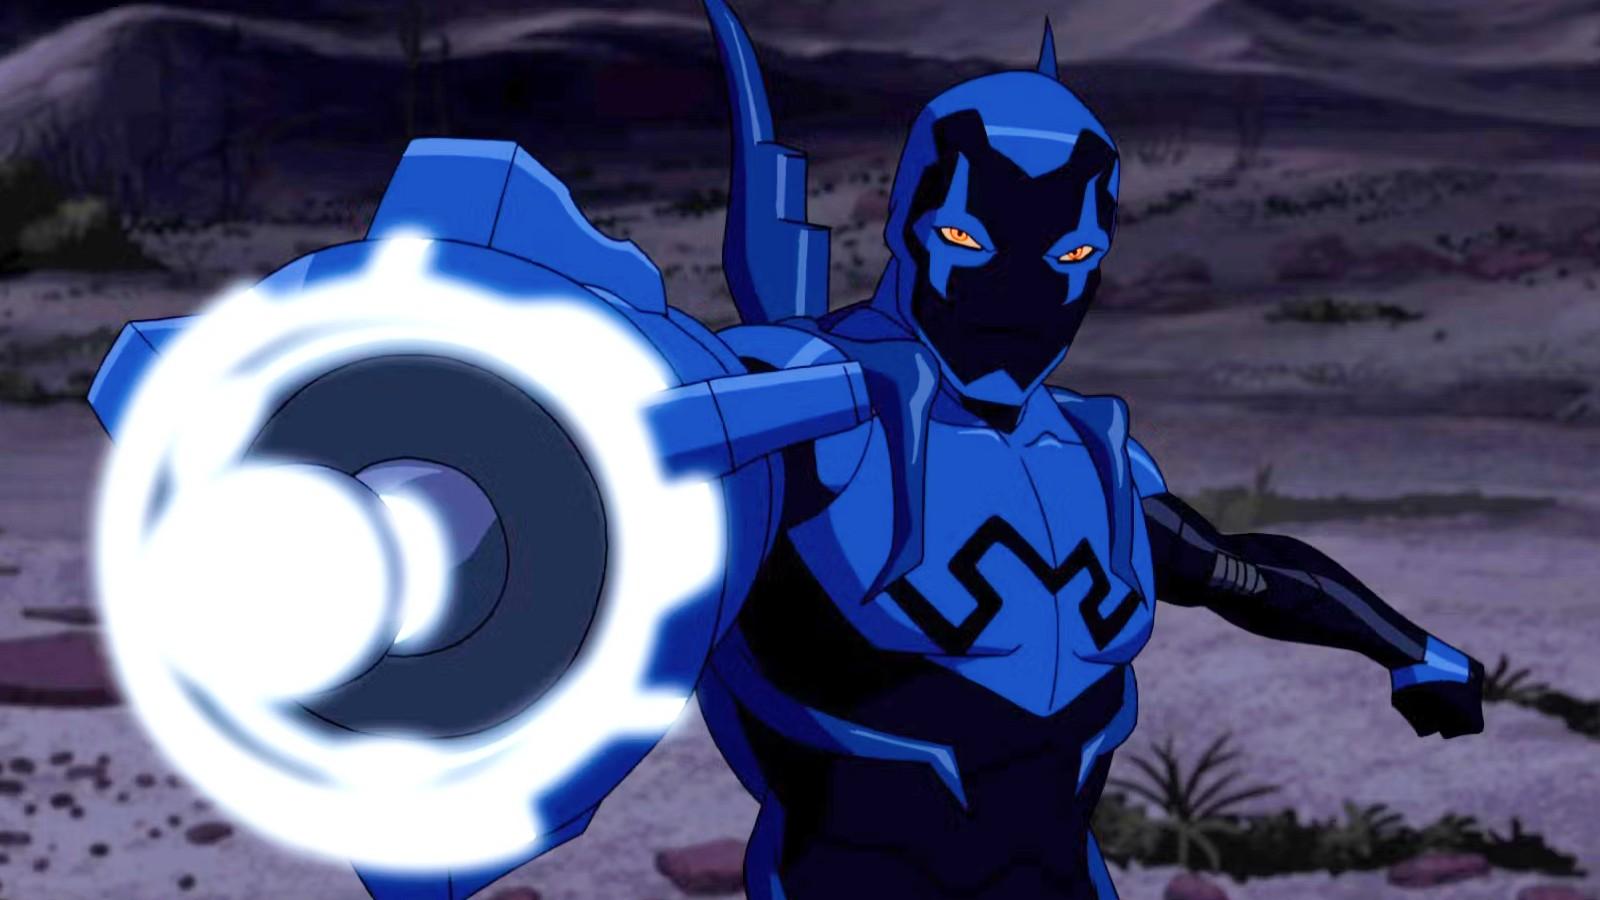 How to watch Blue Beetle TV show: Young Justice & more - Dexerto